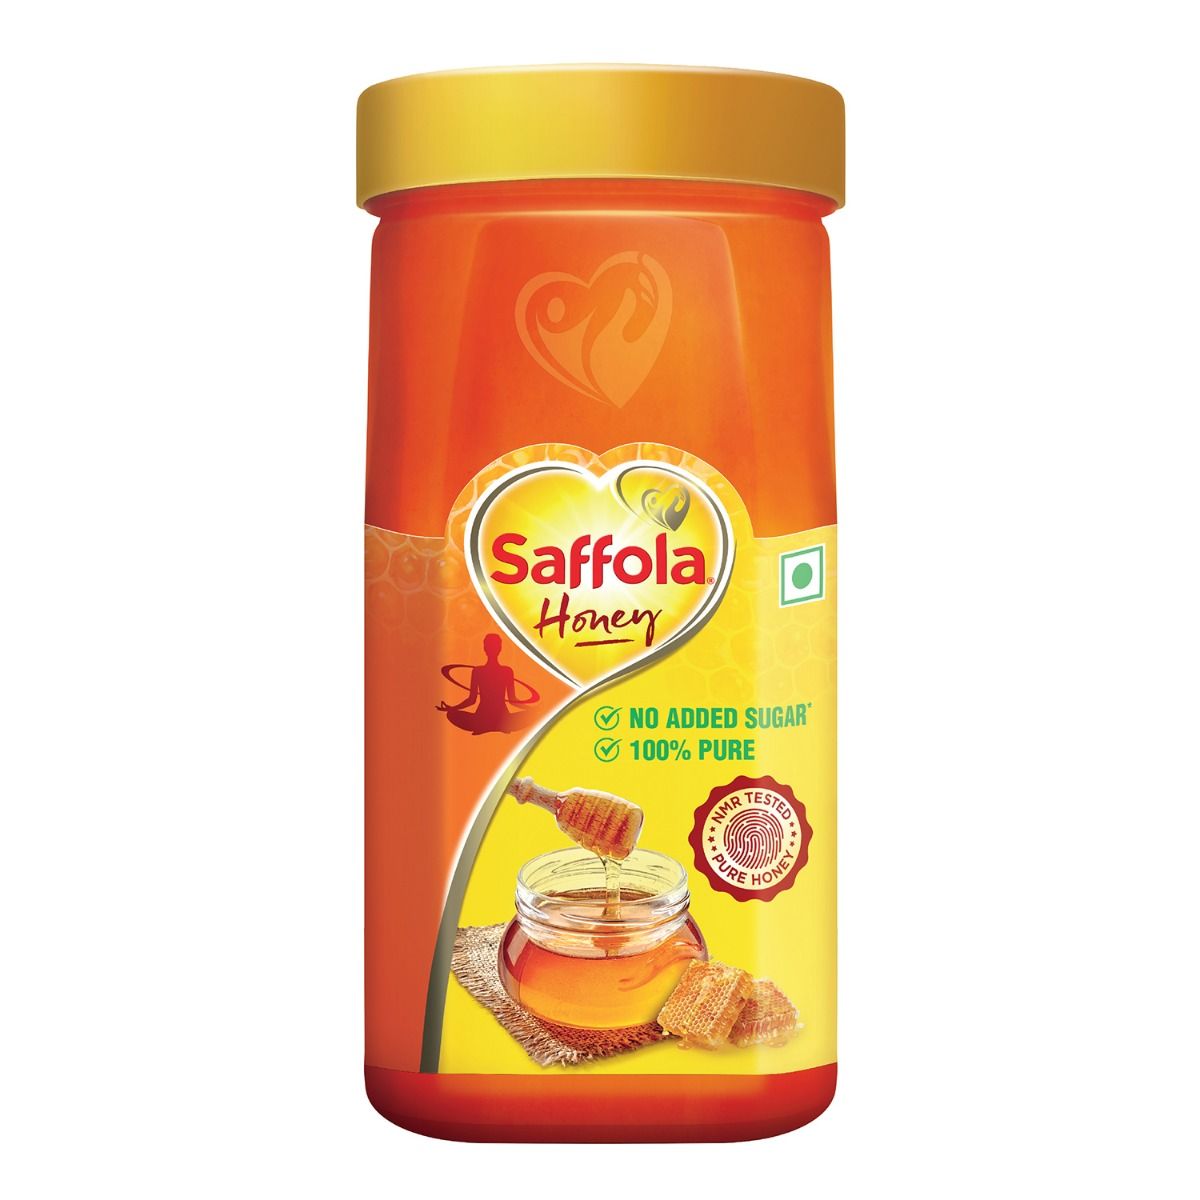 Saffola Honey, 500 gm, Pack of 1 